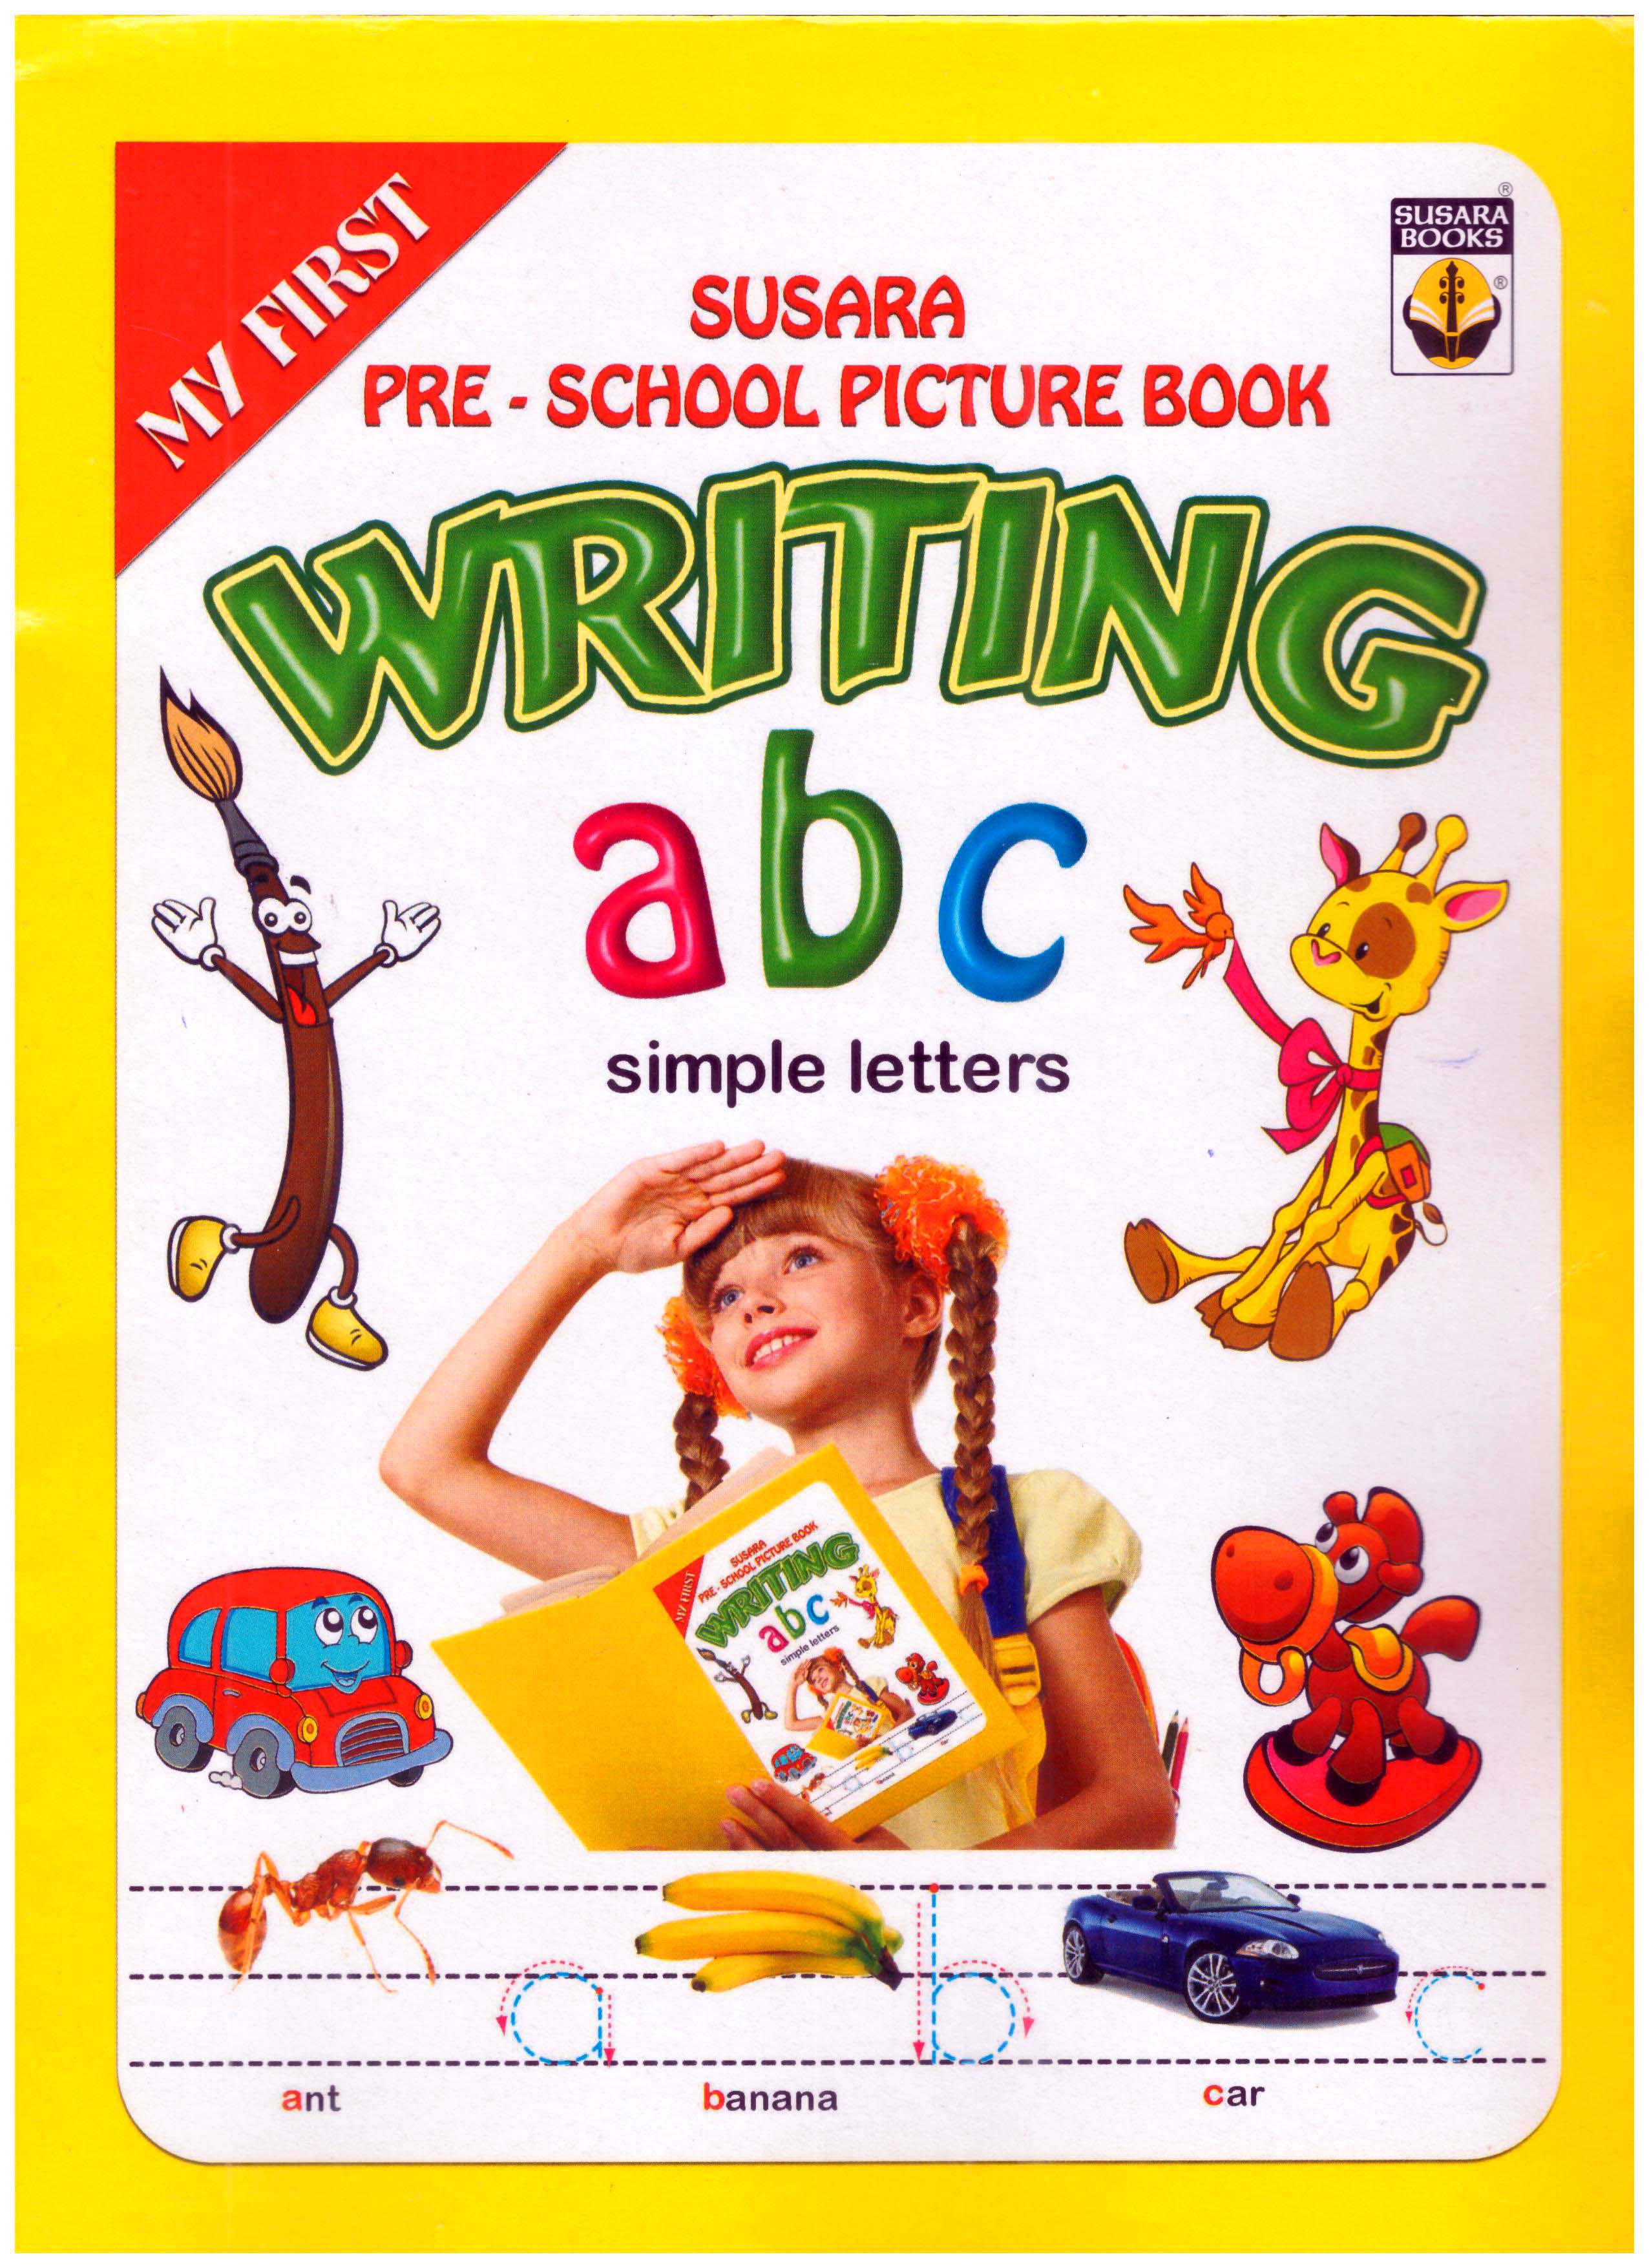 My First Susara Pre-School Picture Book Writing abc Simple Letters